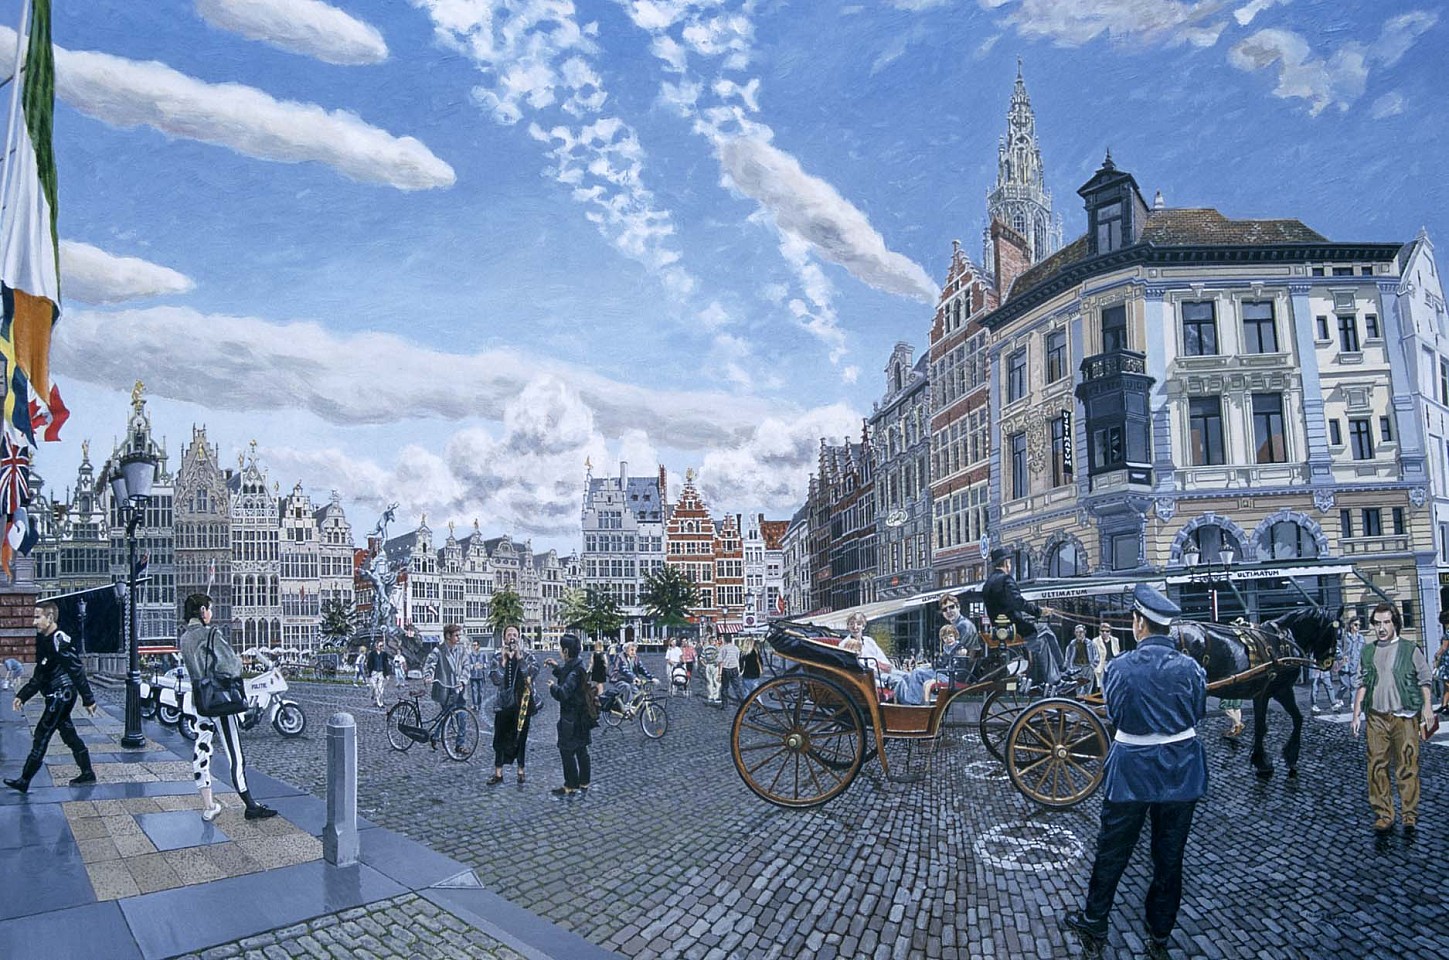 Huw Parsons
The Great Market Square - Antwerp, 1996
oil on board, 94.5 x 66.4 cm